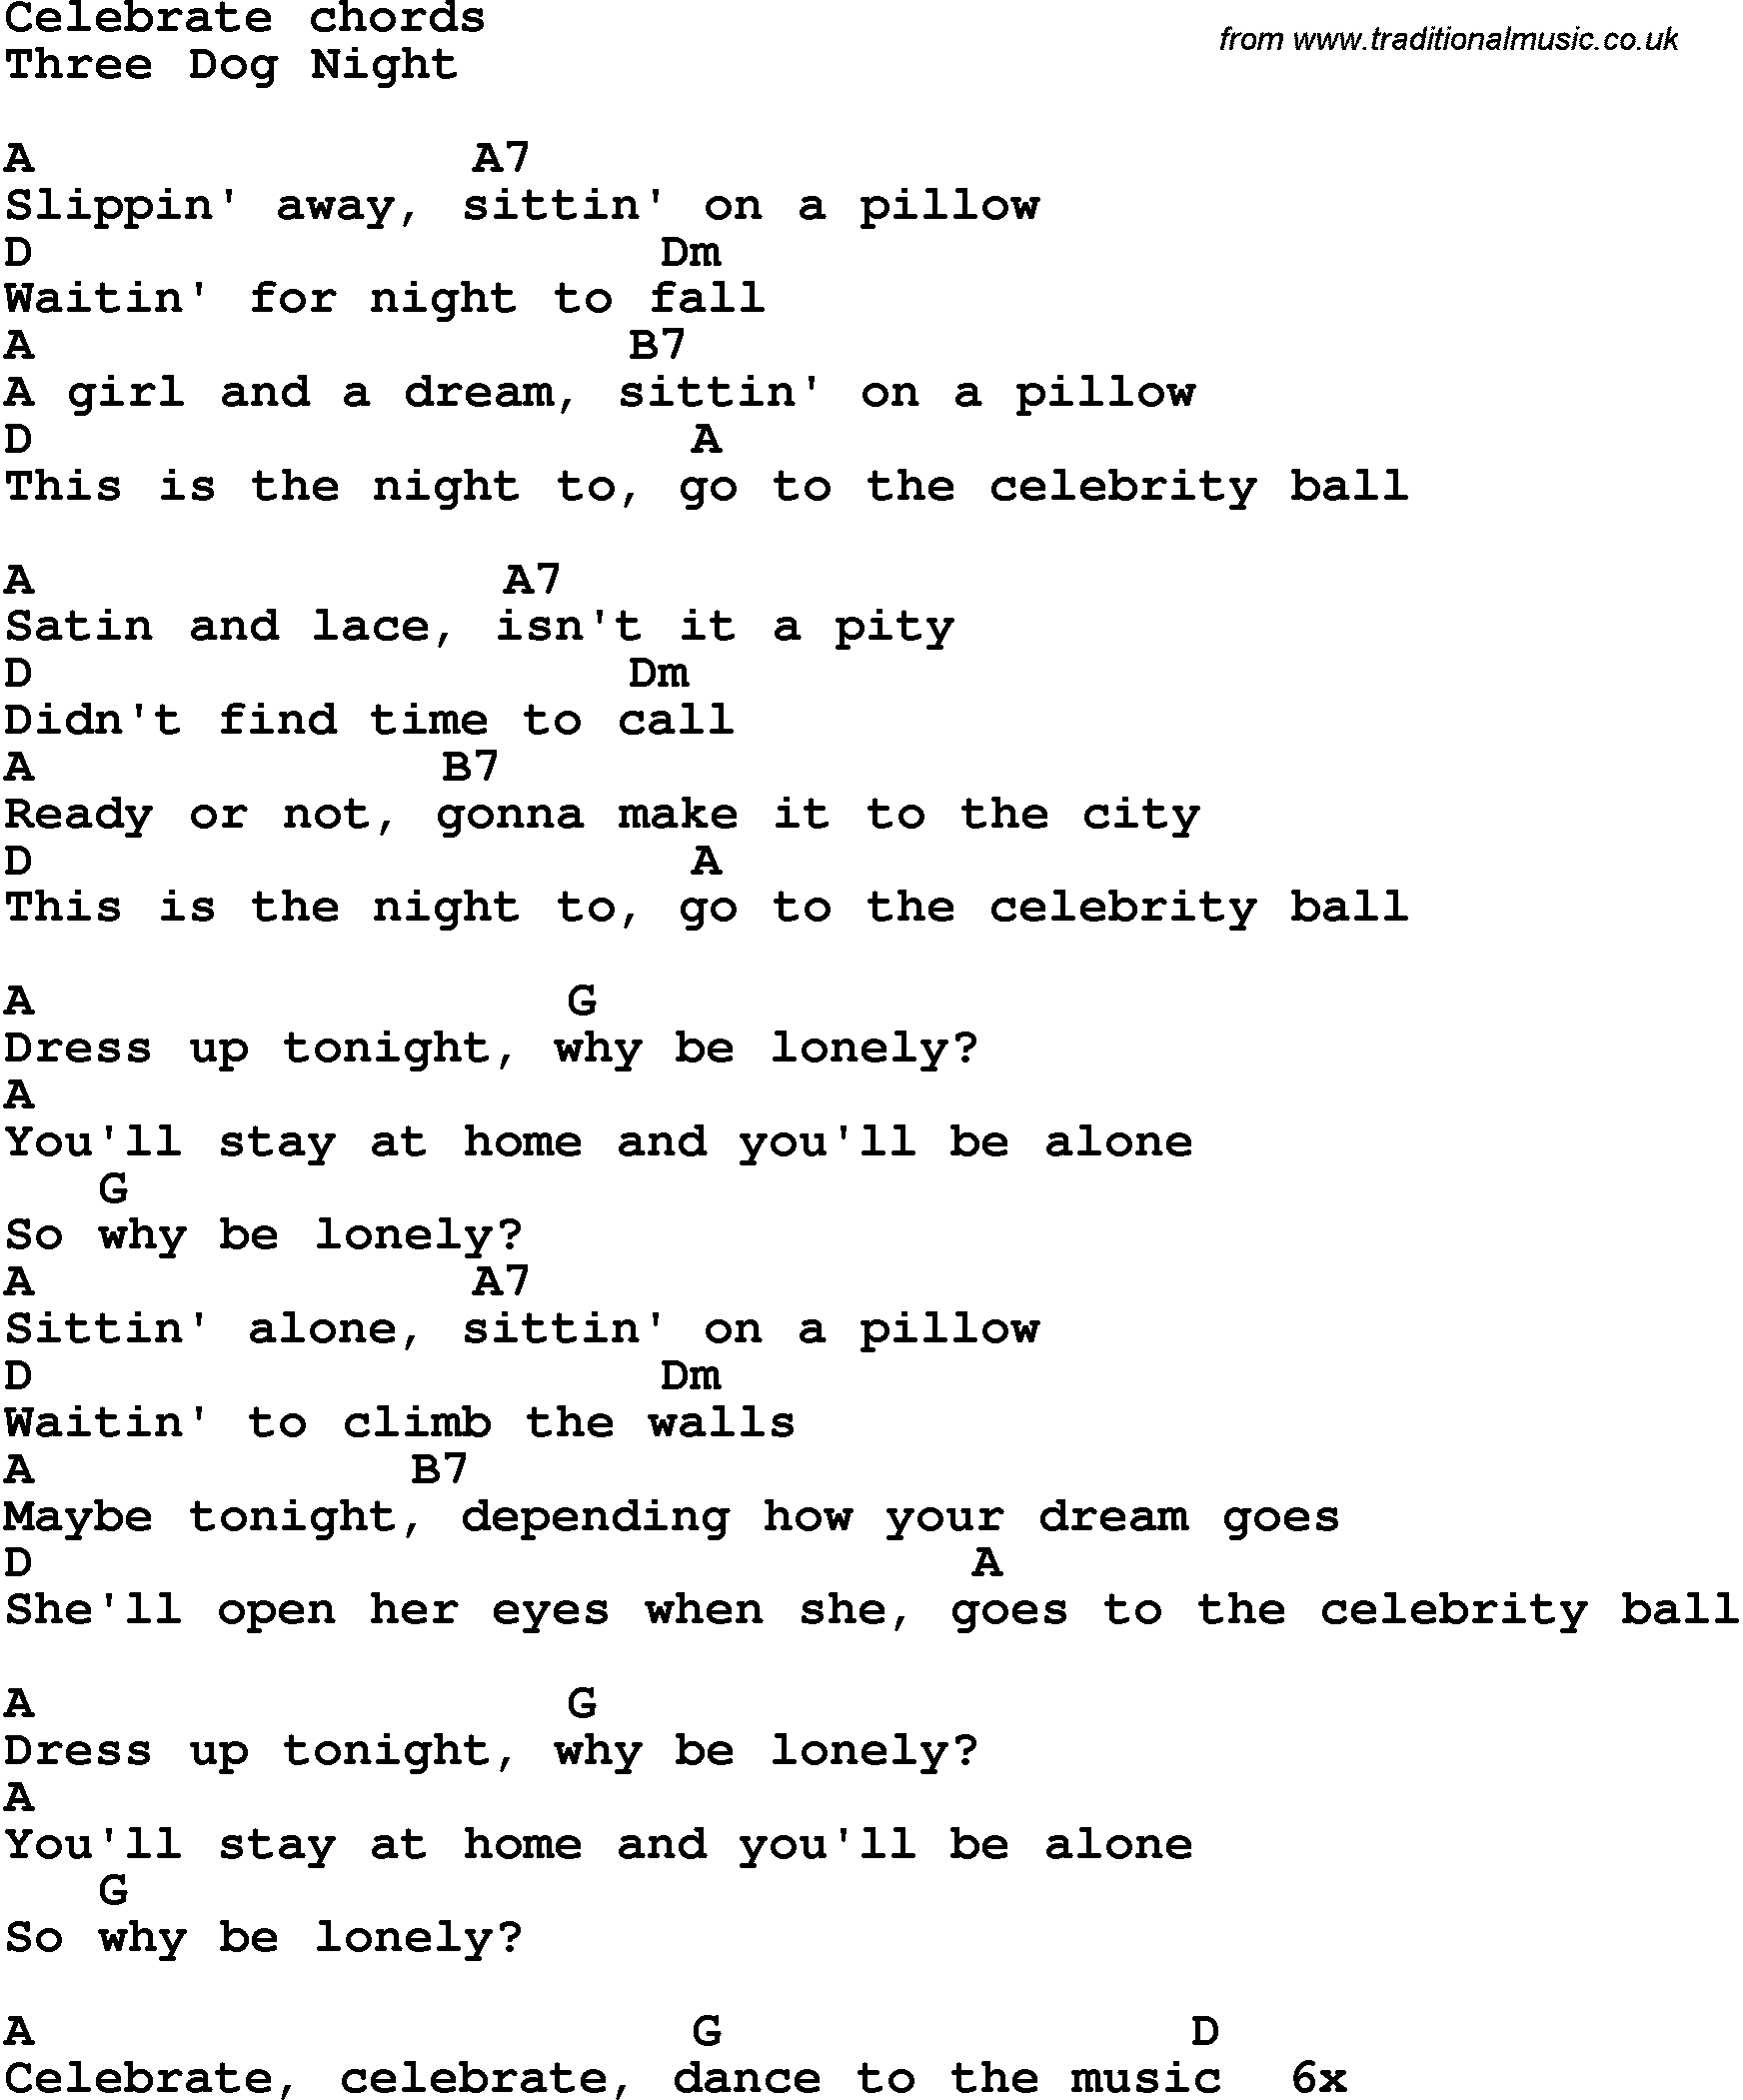 Song Lyrics with guitar chords for Celebrate